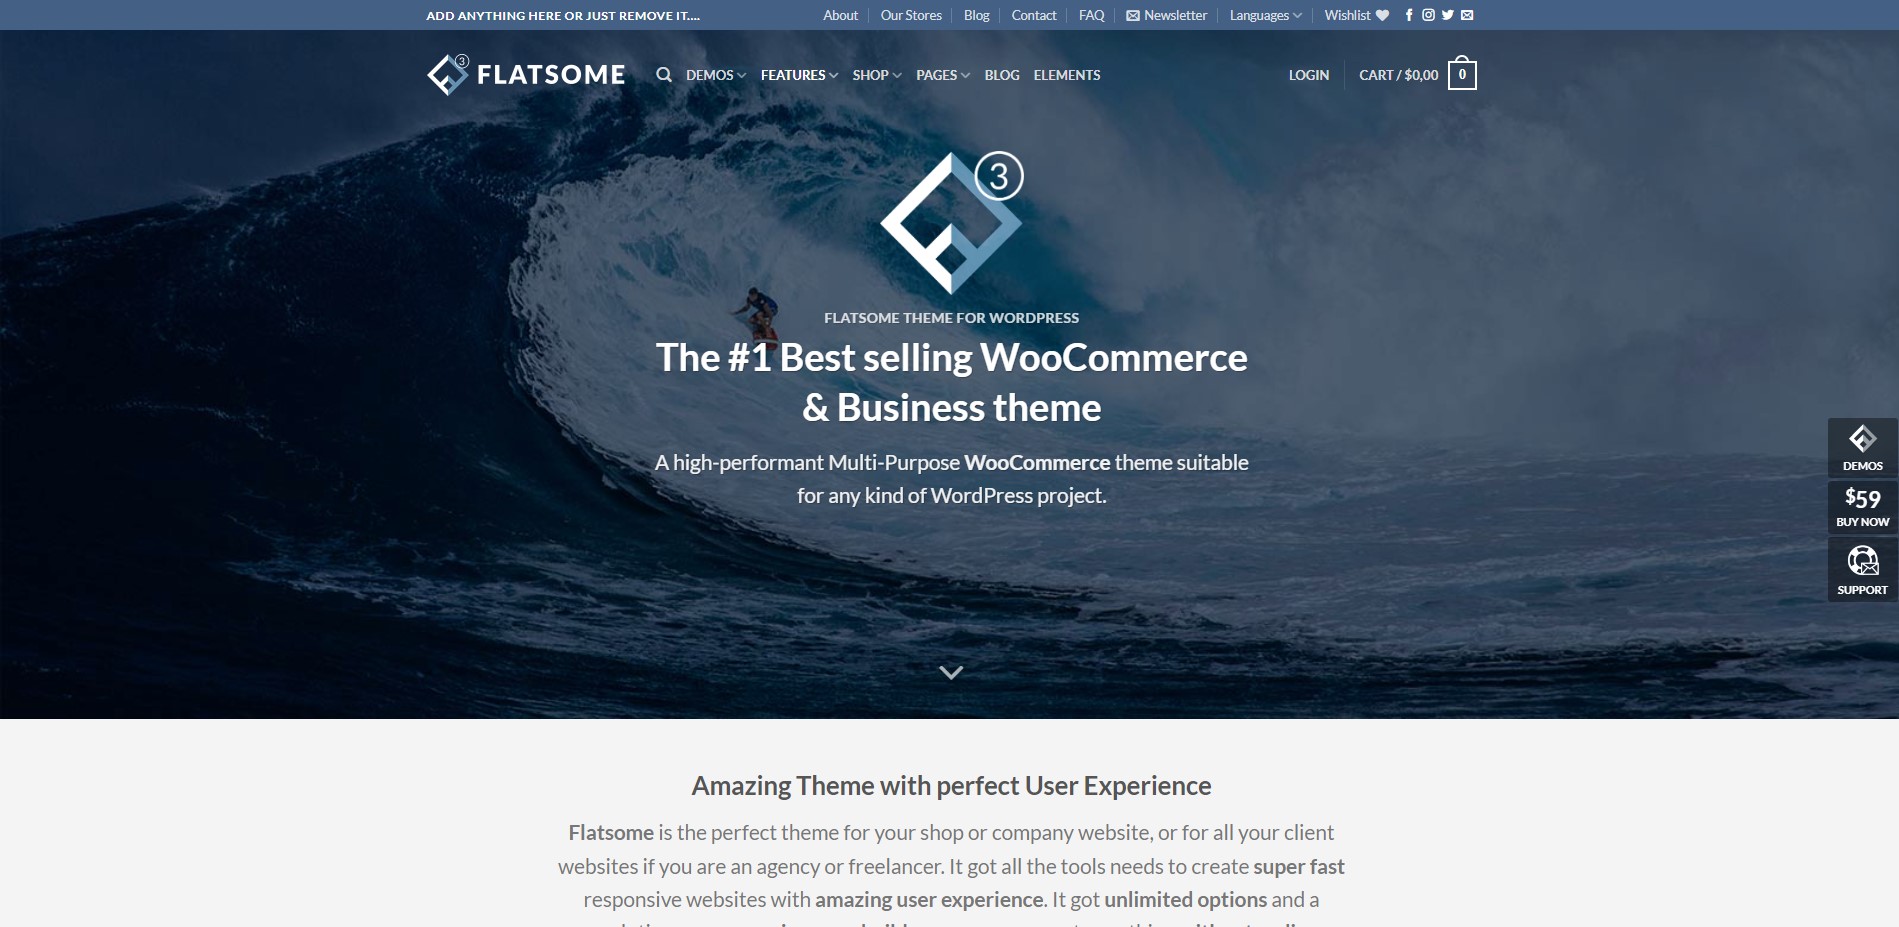 flatsome build an awesome eStore